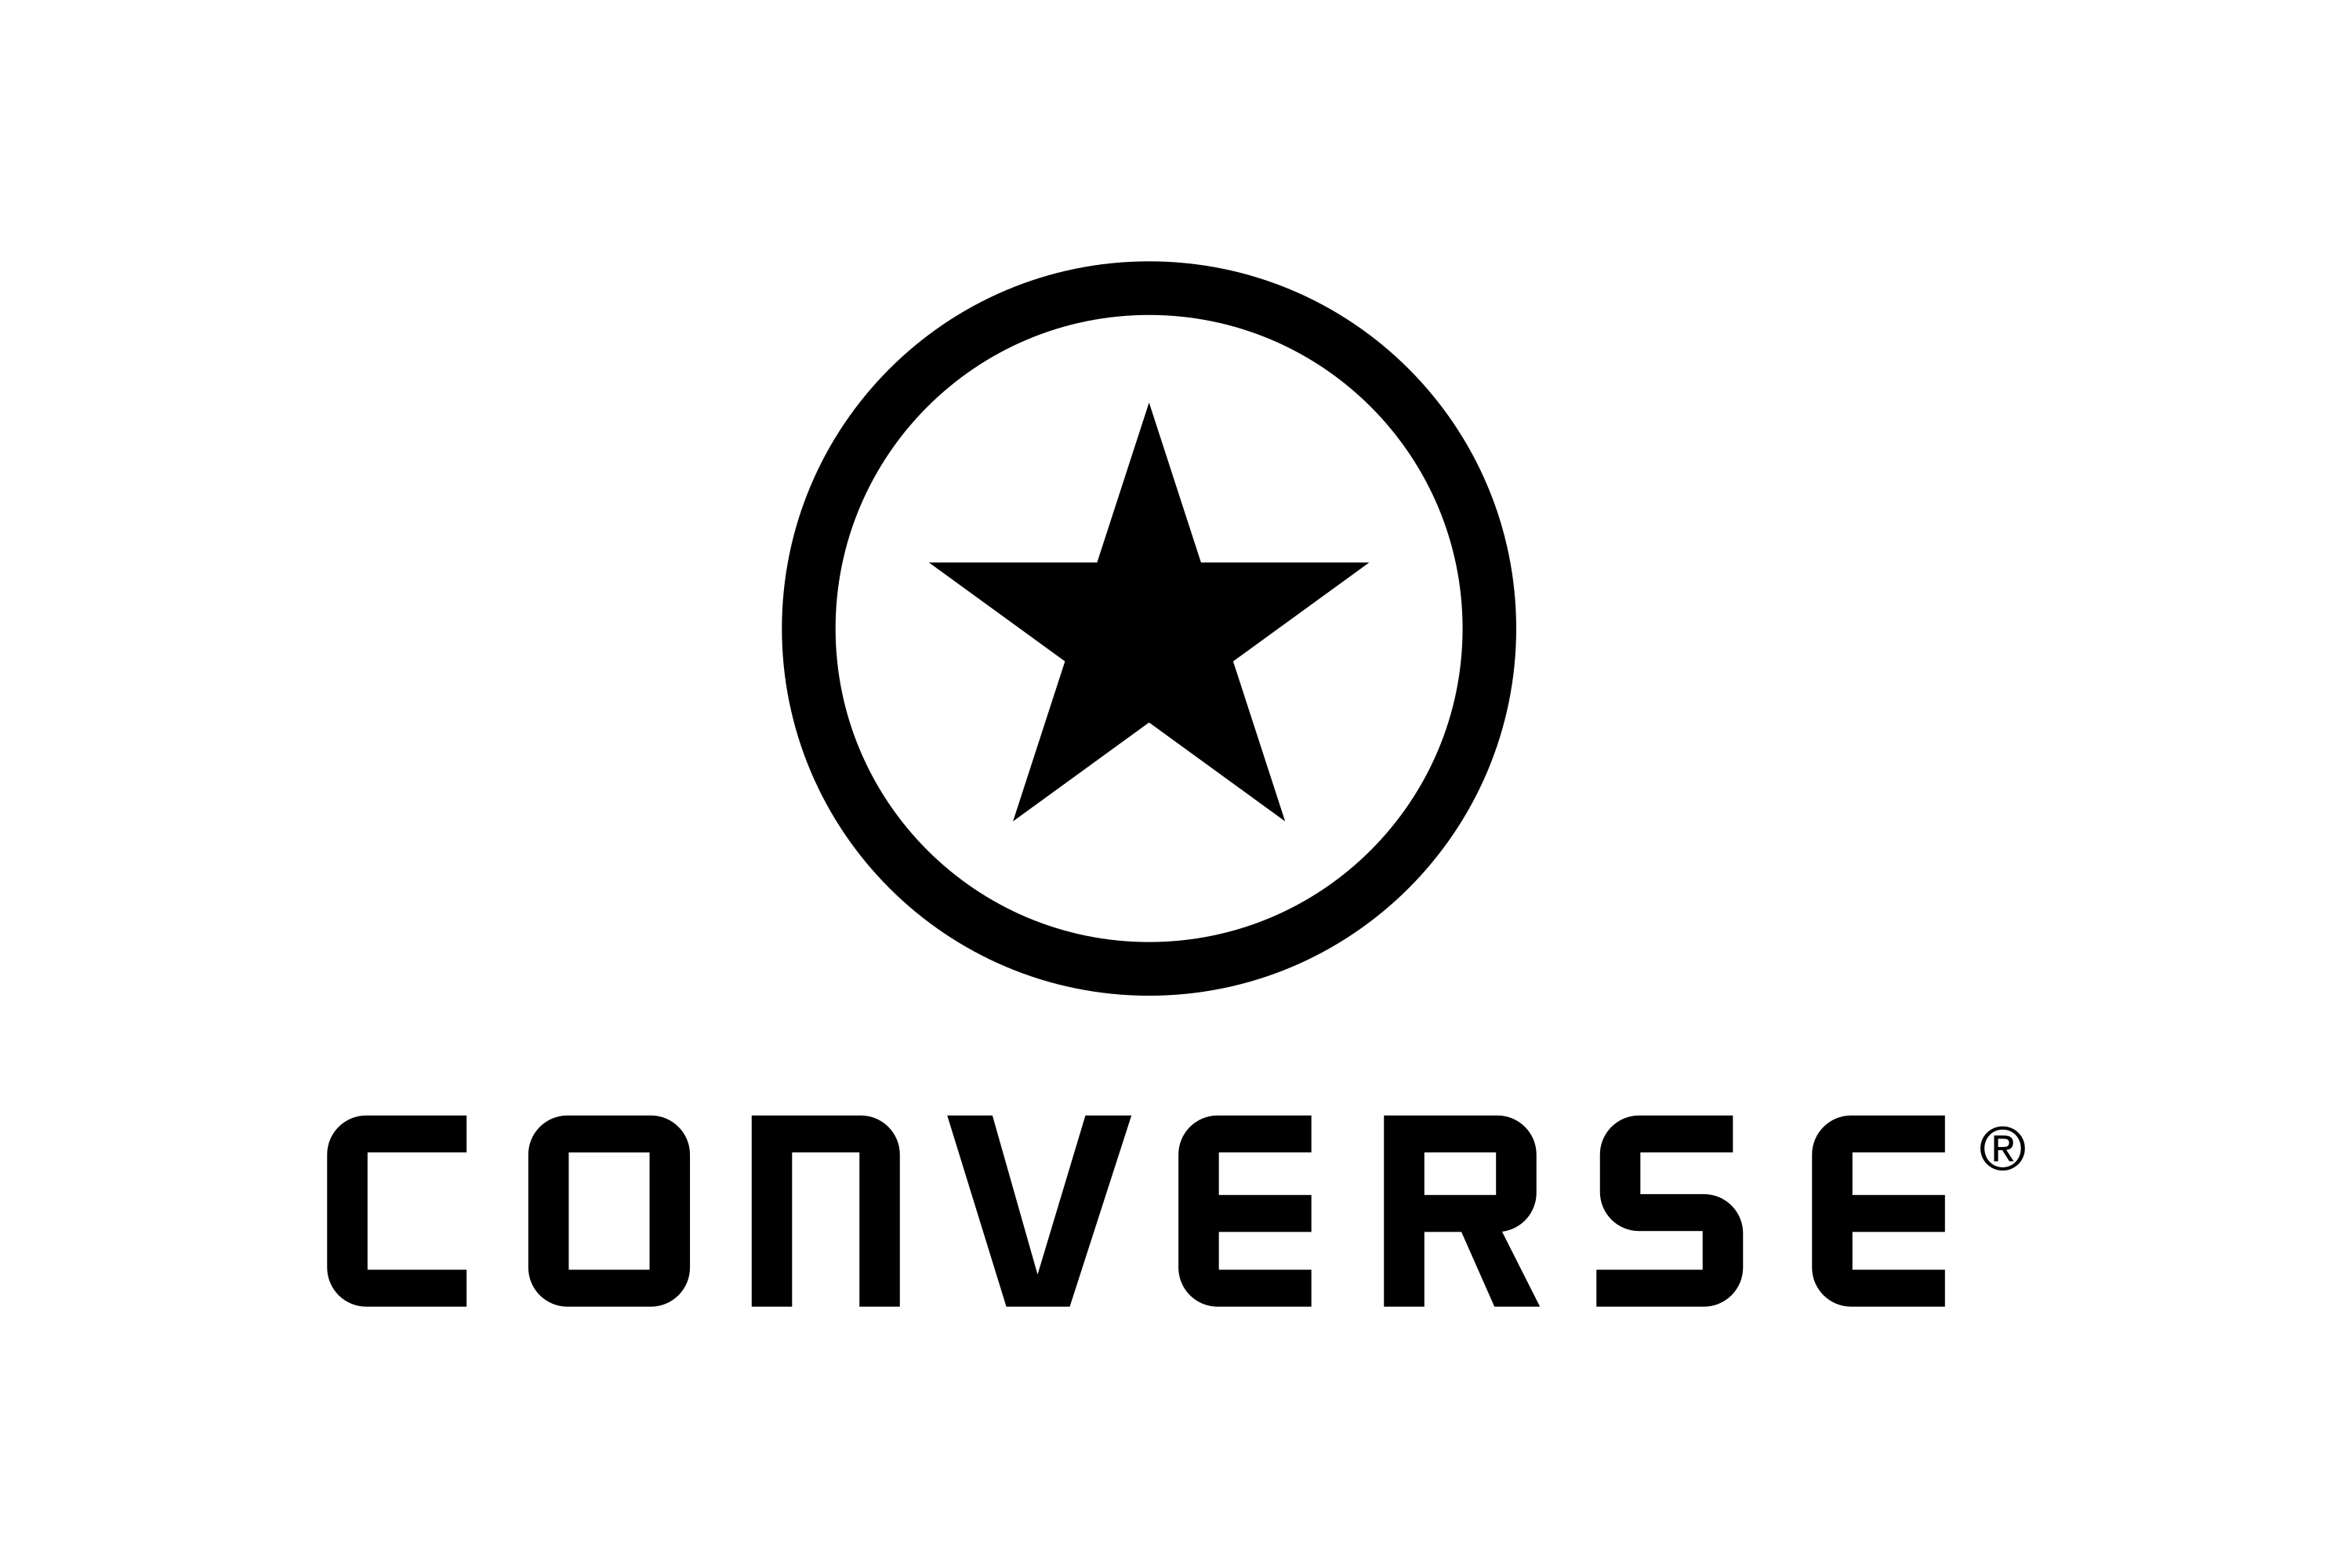 Download Converse in Vector PNG File Format -